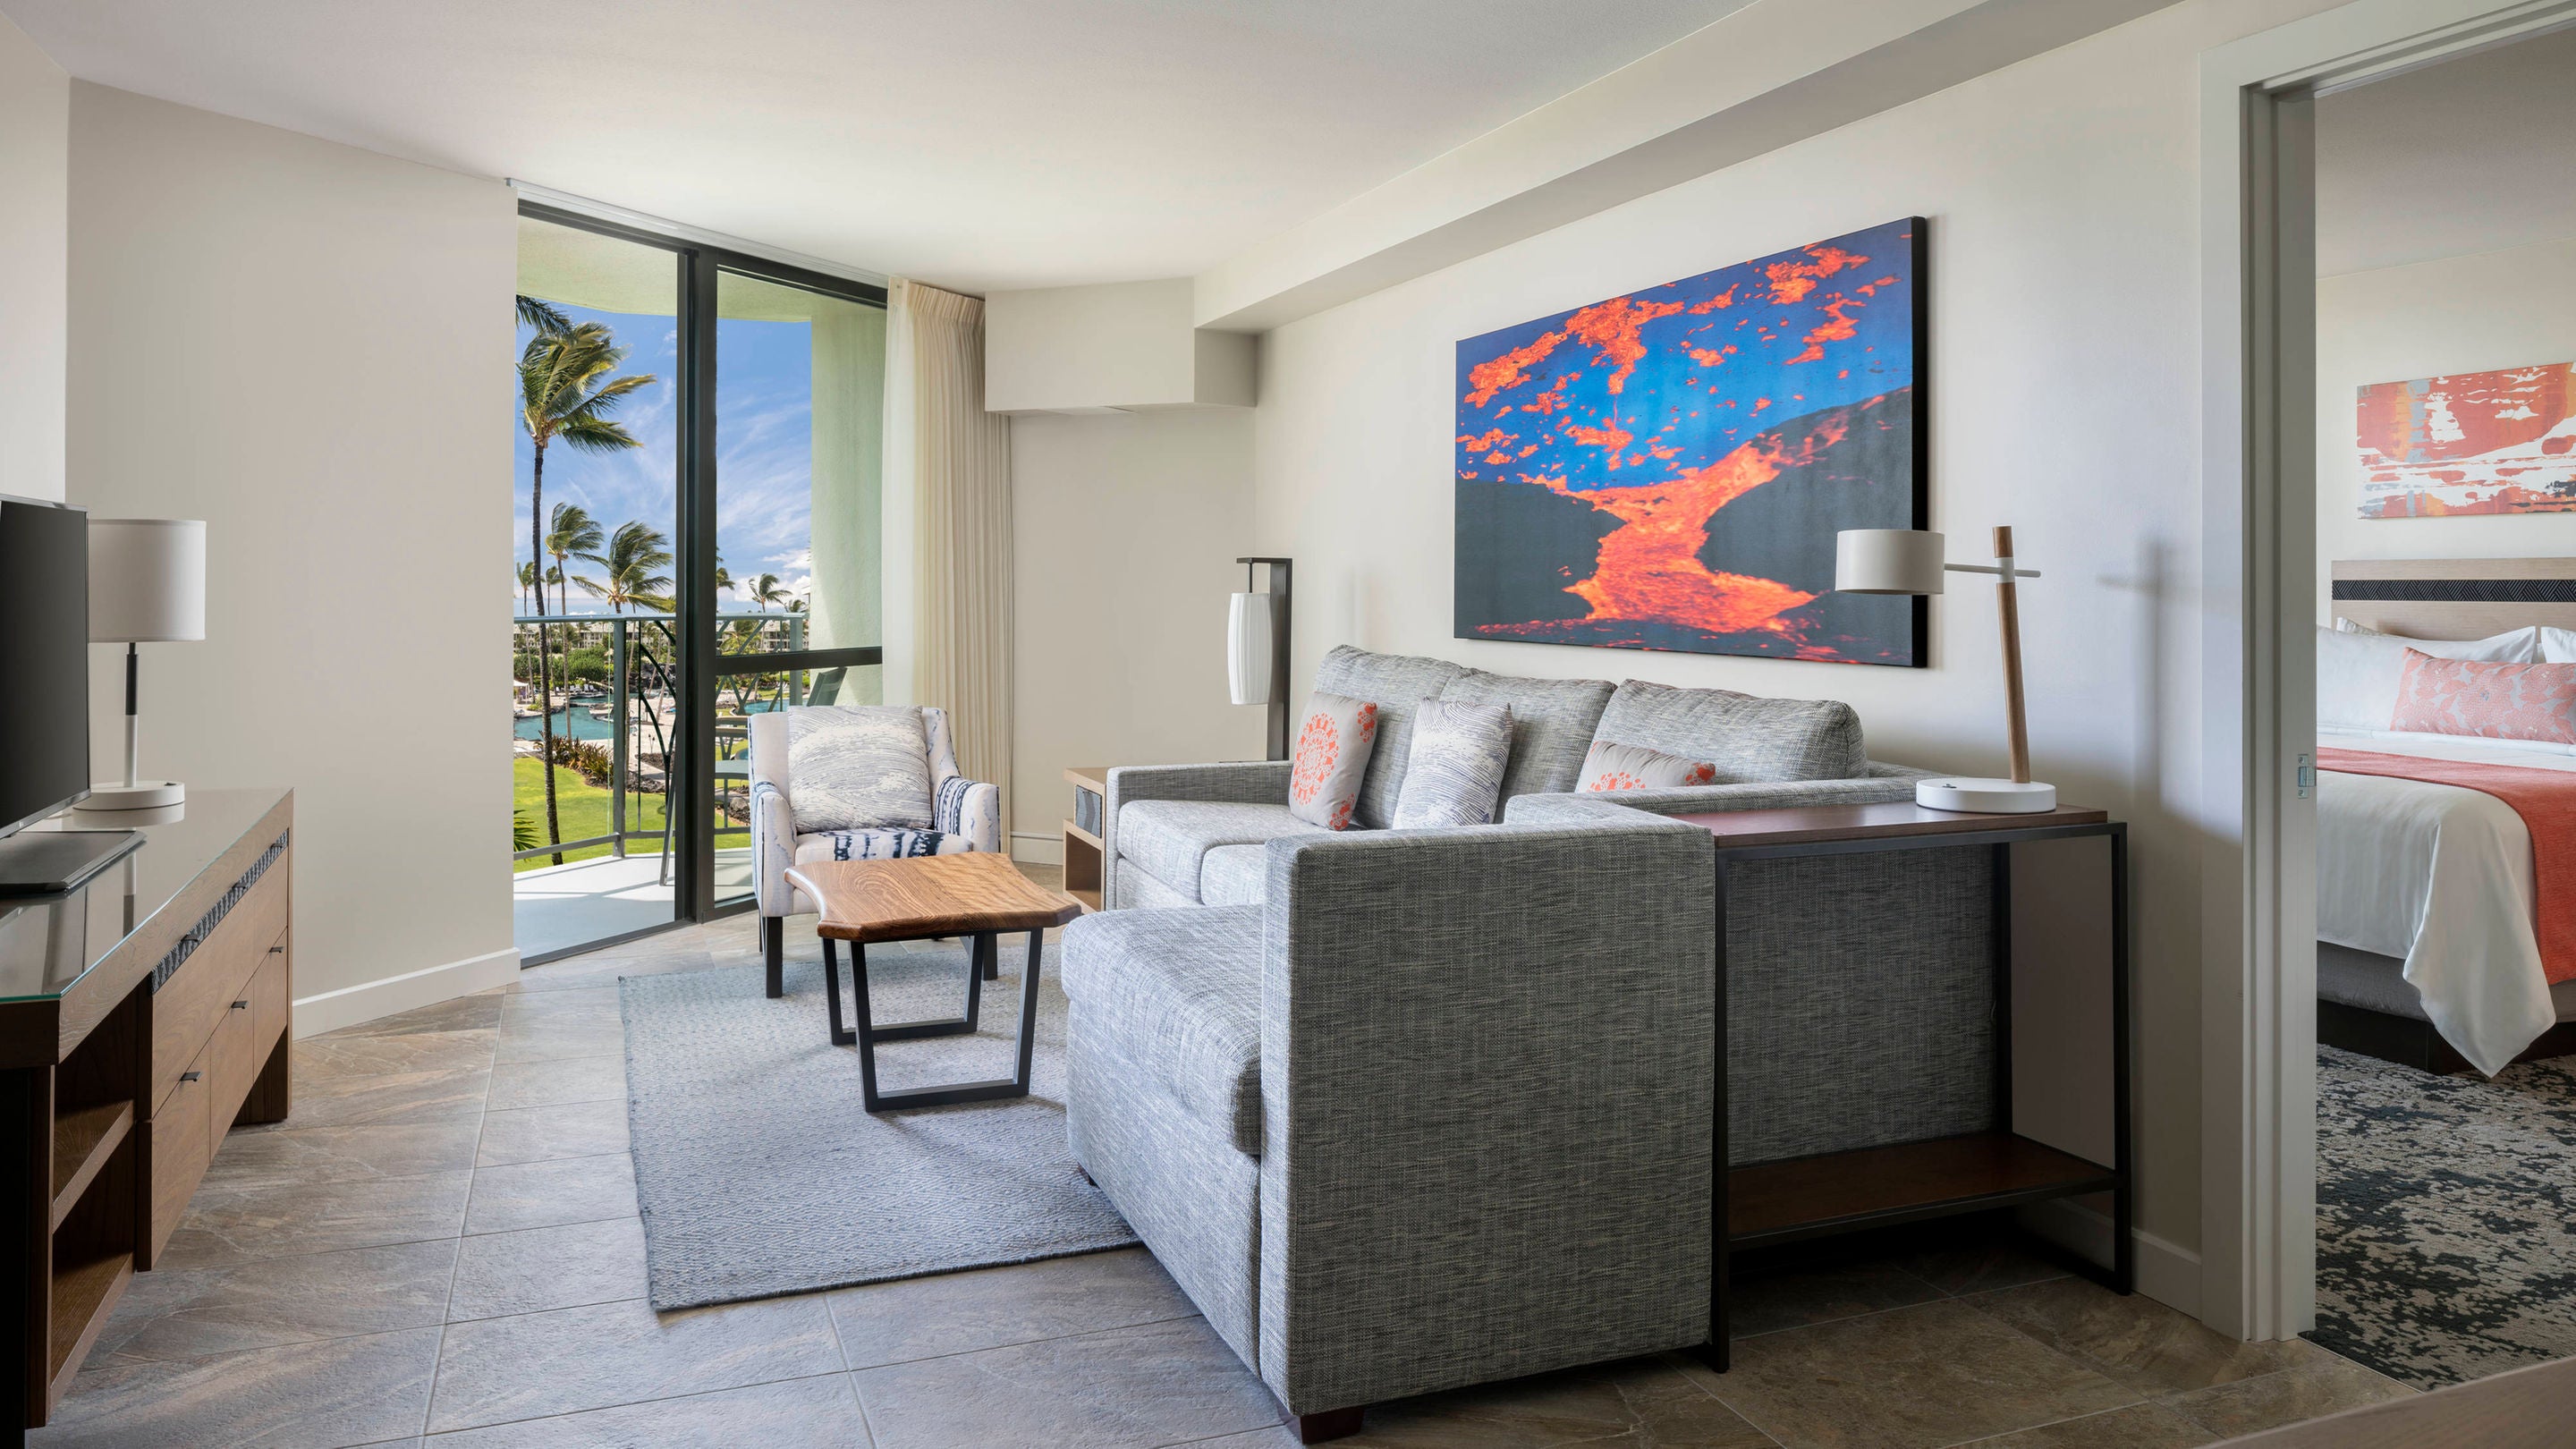 Use Marriott Reward Points to Book Multi-Bedroom Marriott Vacation Club  Properties - The Points Guy